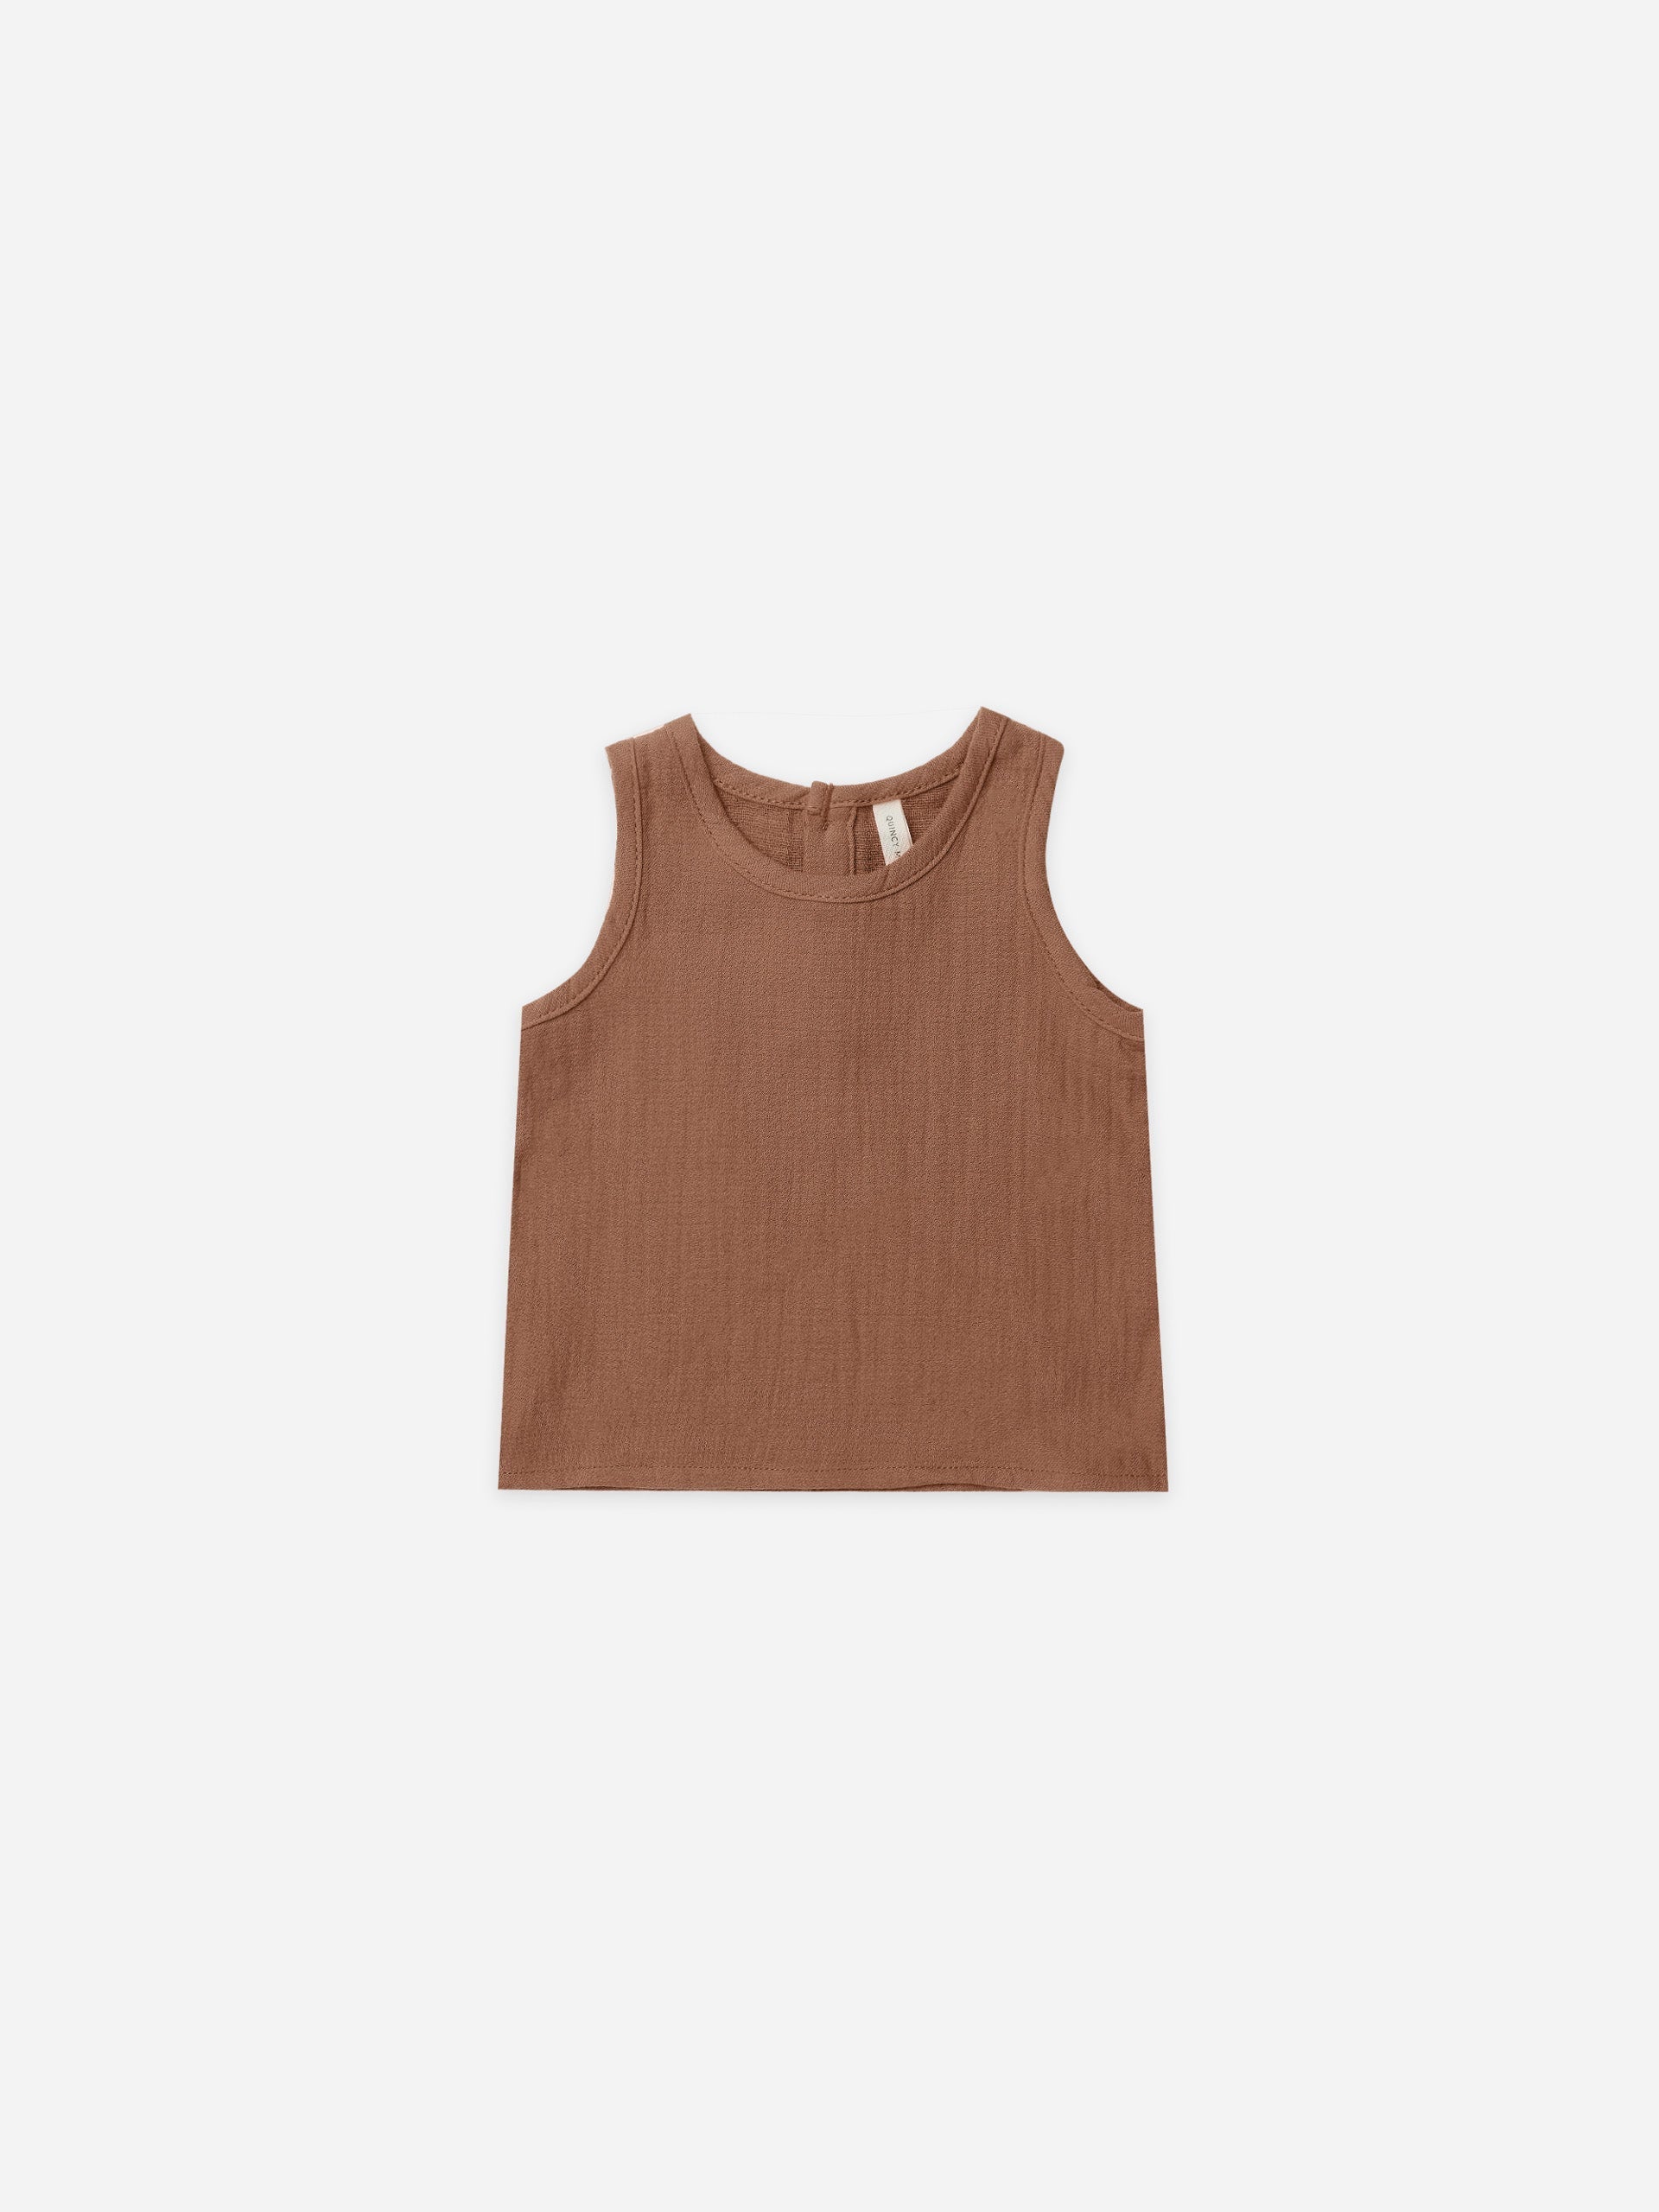 woven tank | sienna - Quincy Mae | Baby Basics | Baby Clothing | Organic Baby Clothes | Modern Baby Boy Clothes |